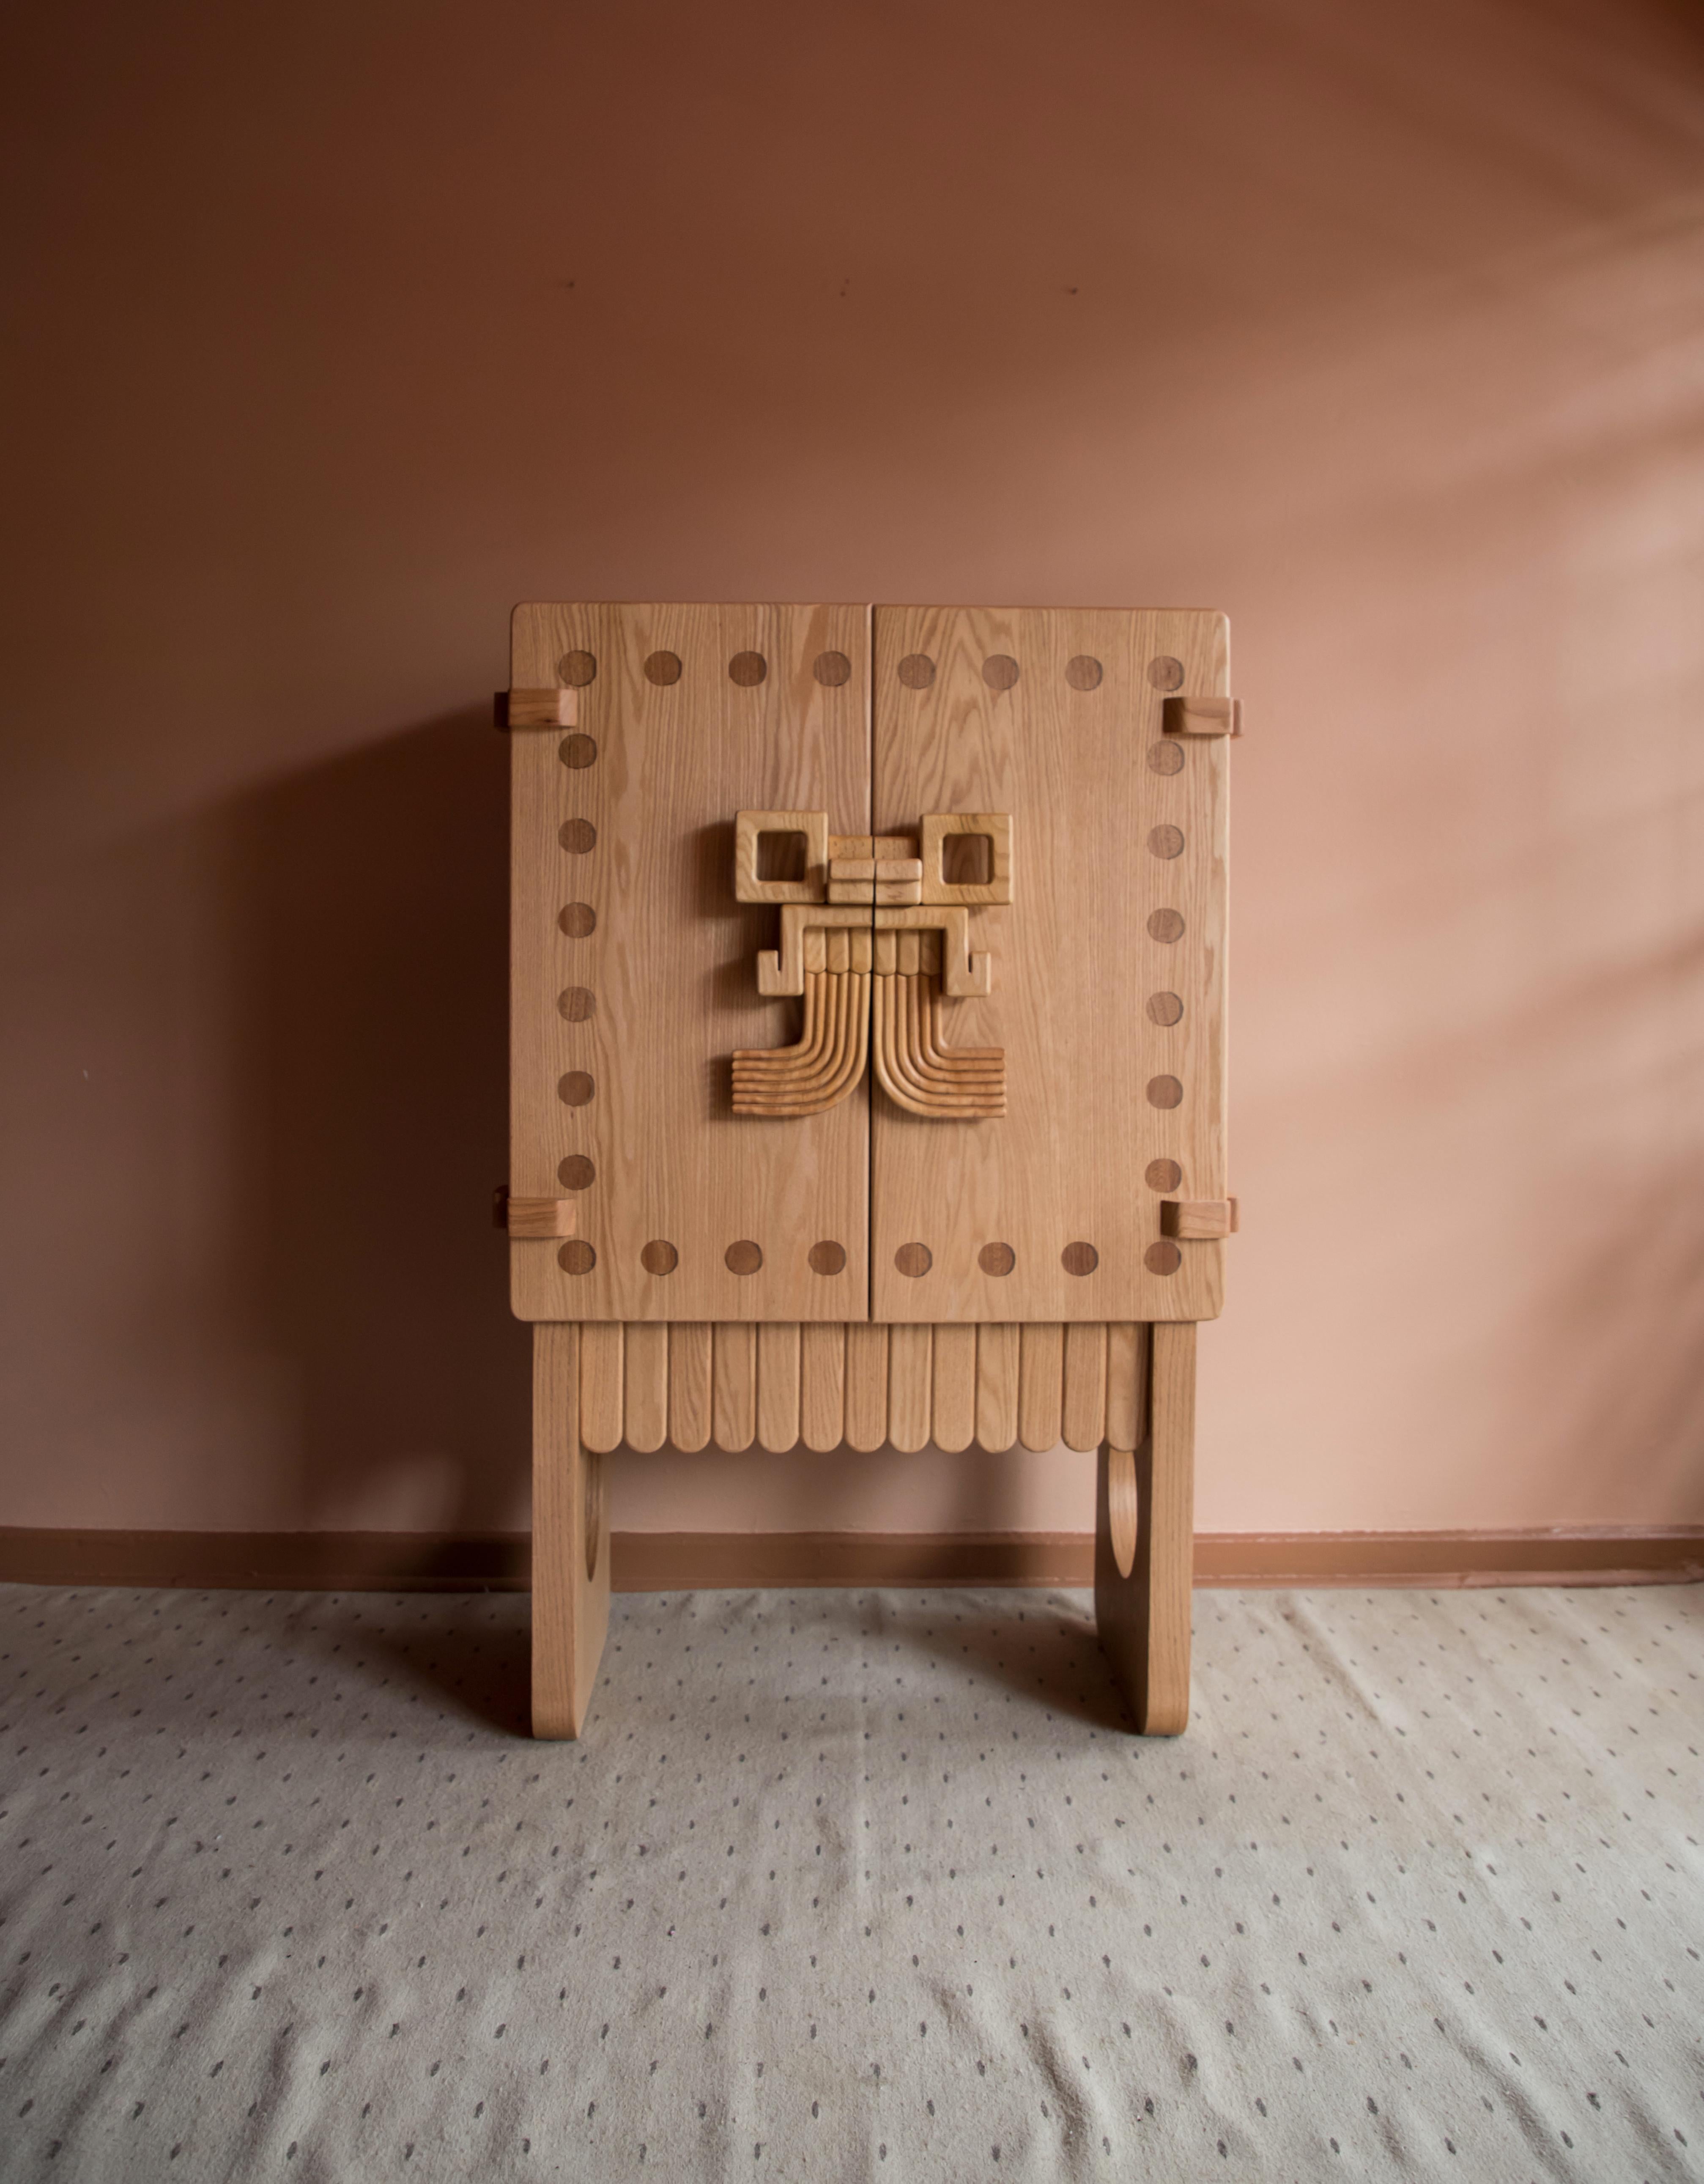 Tlaloc Wine cabinet by Andres Gutierrez
Dimensions: D40 x W80 x H130 cm
Materials: Body: solid white oak wood, Legs: white oak plywood.


— Inspired by Tlaloc, “The One Who Makes Things Sprout”, mesoamerican god of rainand water— Friendly